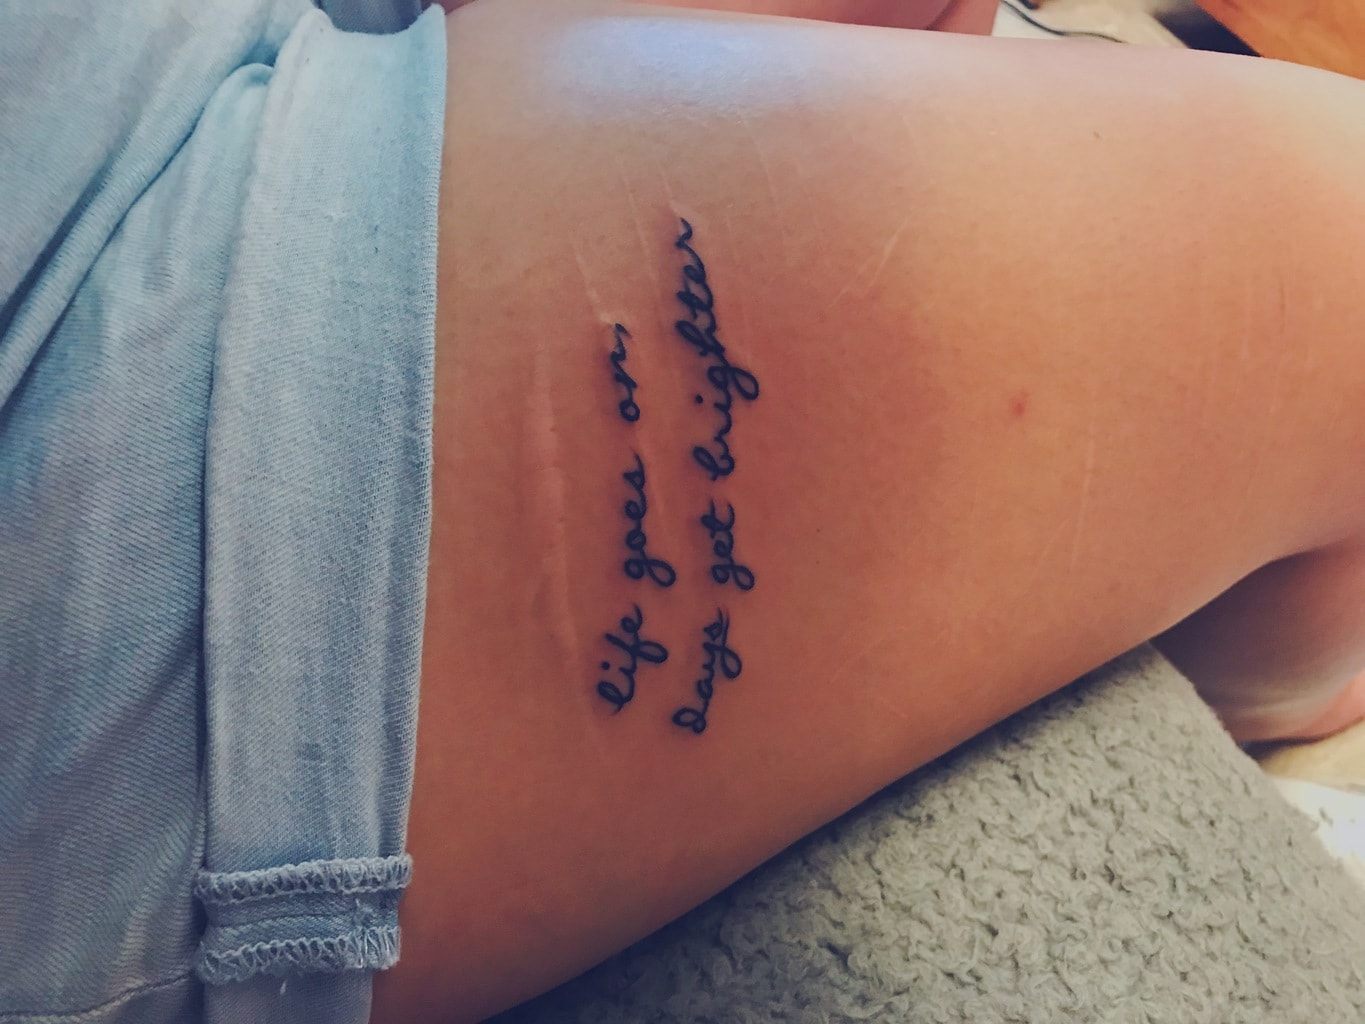 “Life goes on, days get brighter” thigh tattoo